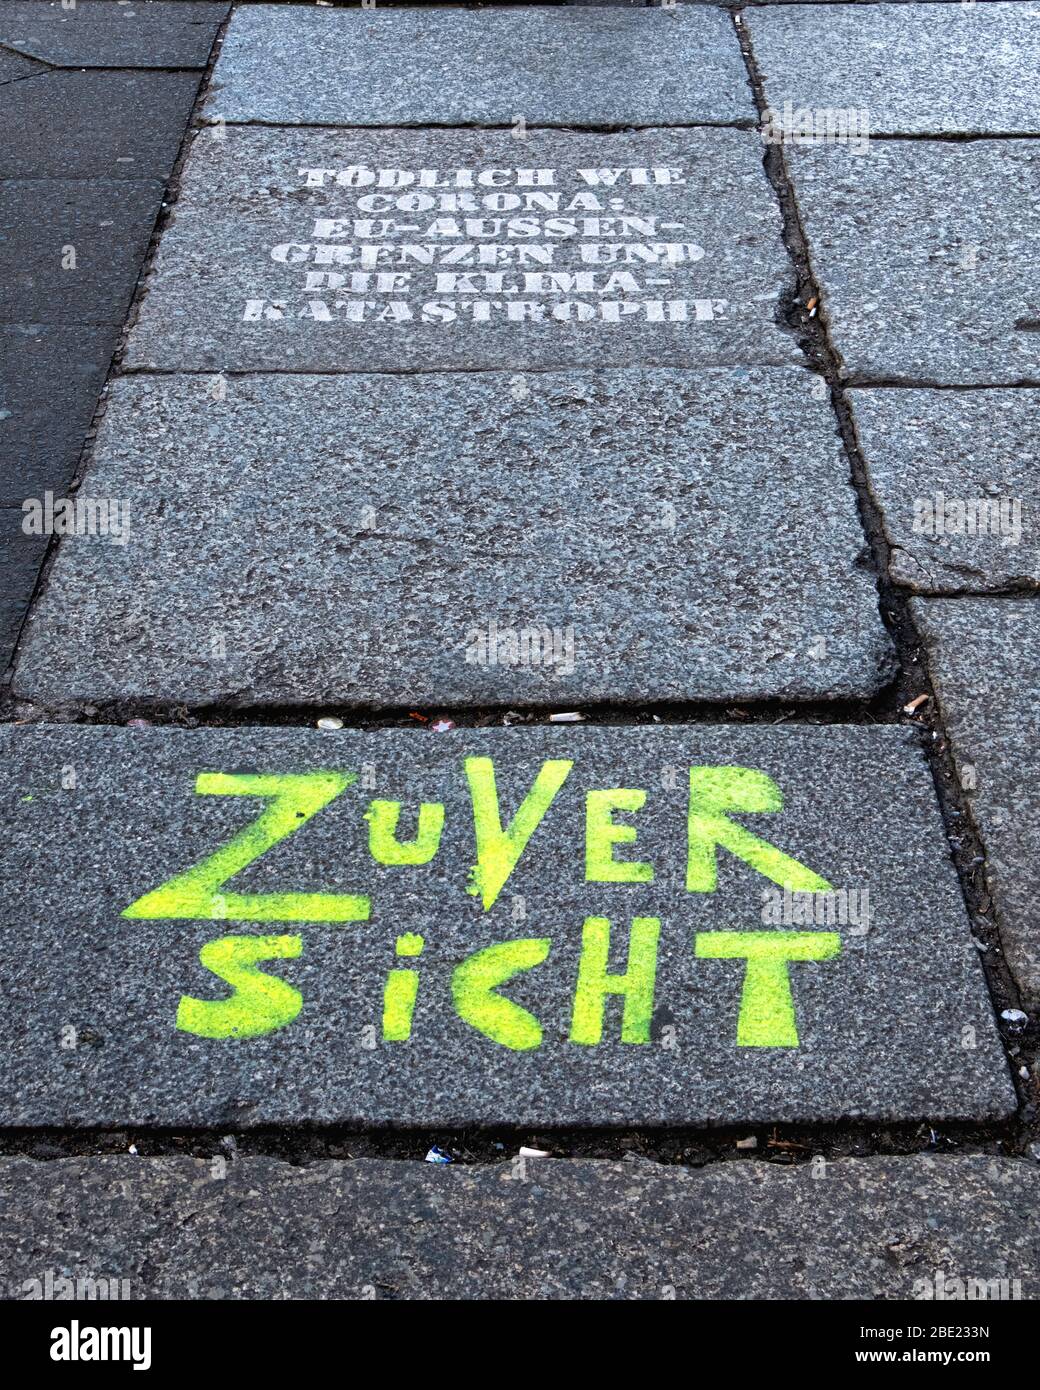 Berlin, Mitte, Stencil messages on city sidewalk during the COVID-19 pandemic Stock Photo